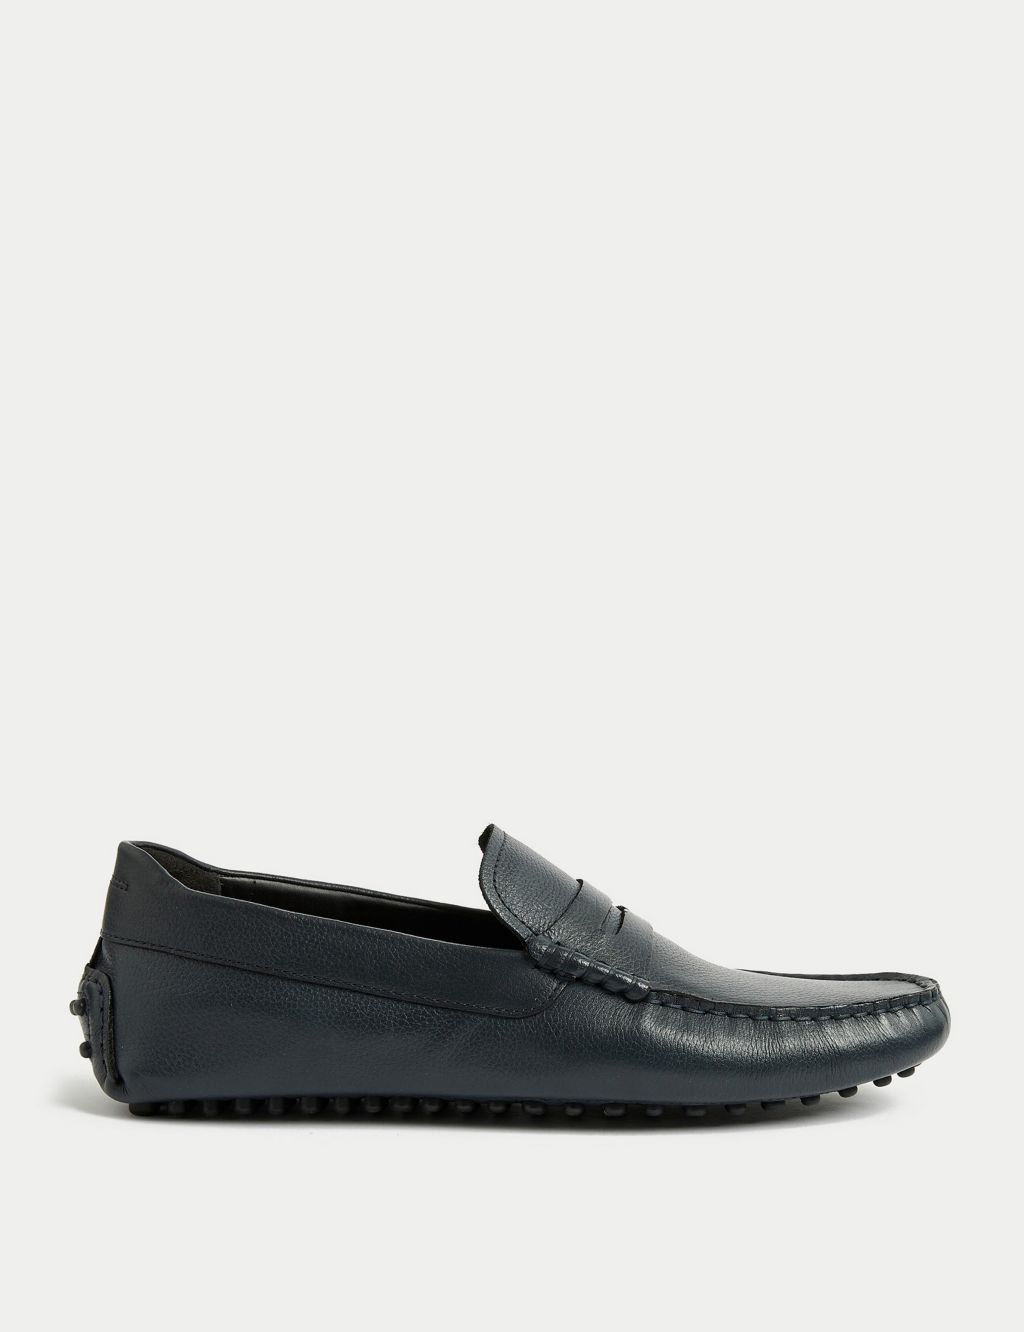 Leather Slip-On Driving Shoes image 1